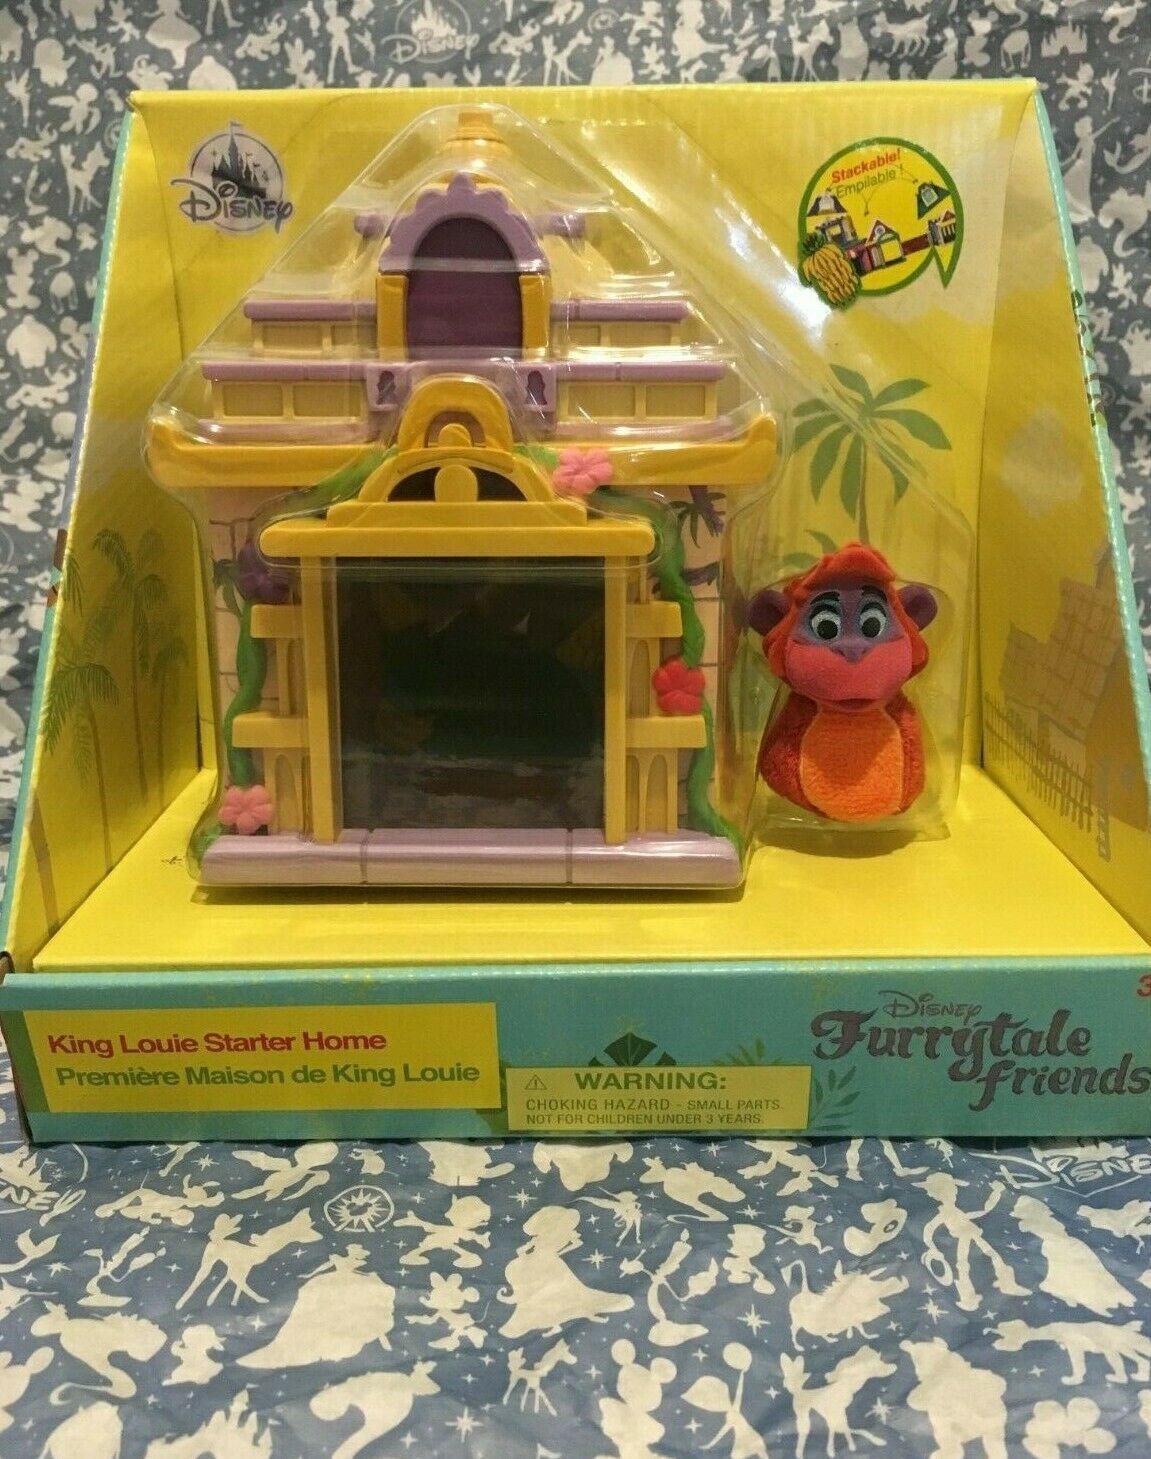 Disney furrytale friends King Louie starter home playset from The Jungle Book - $13.34